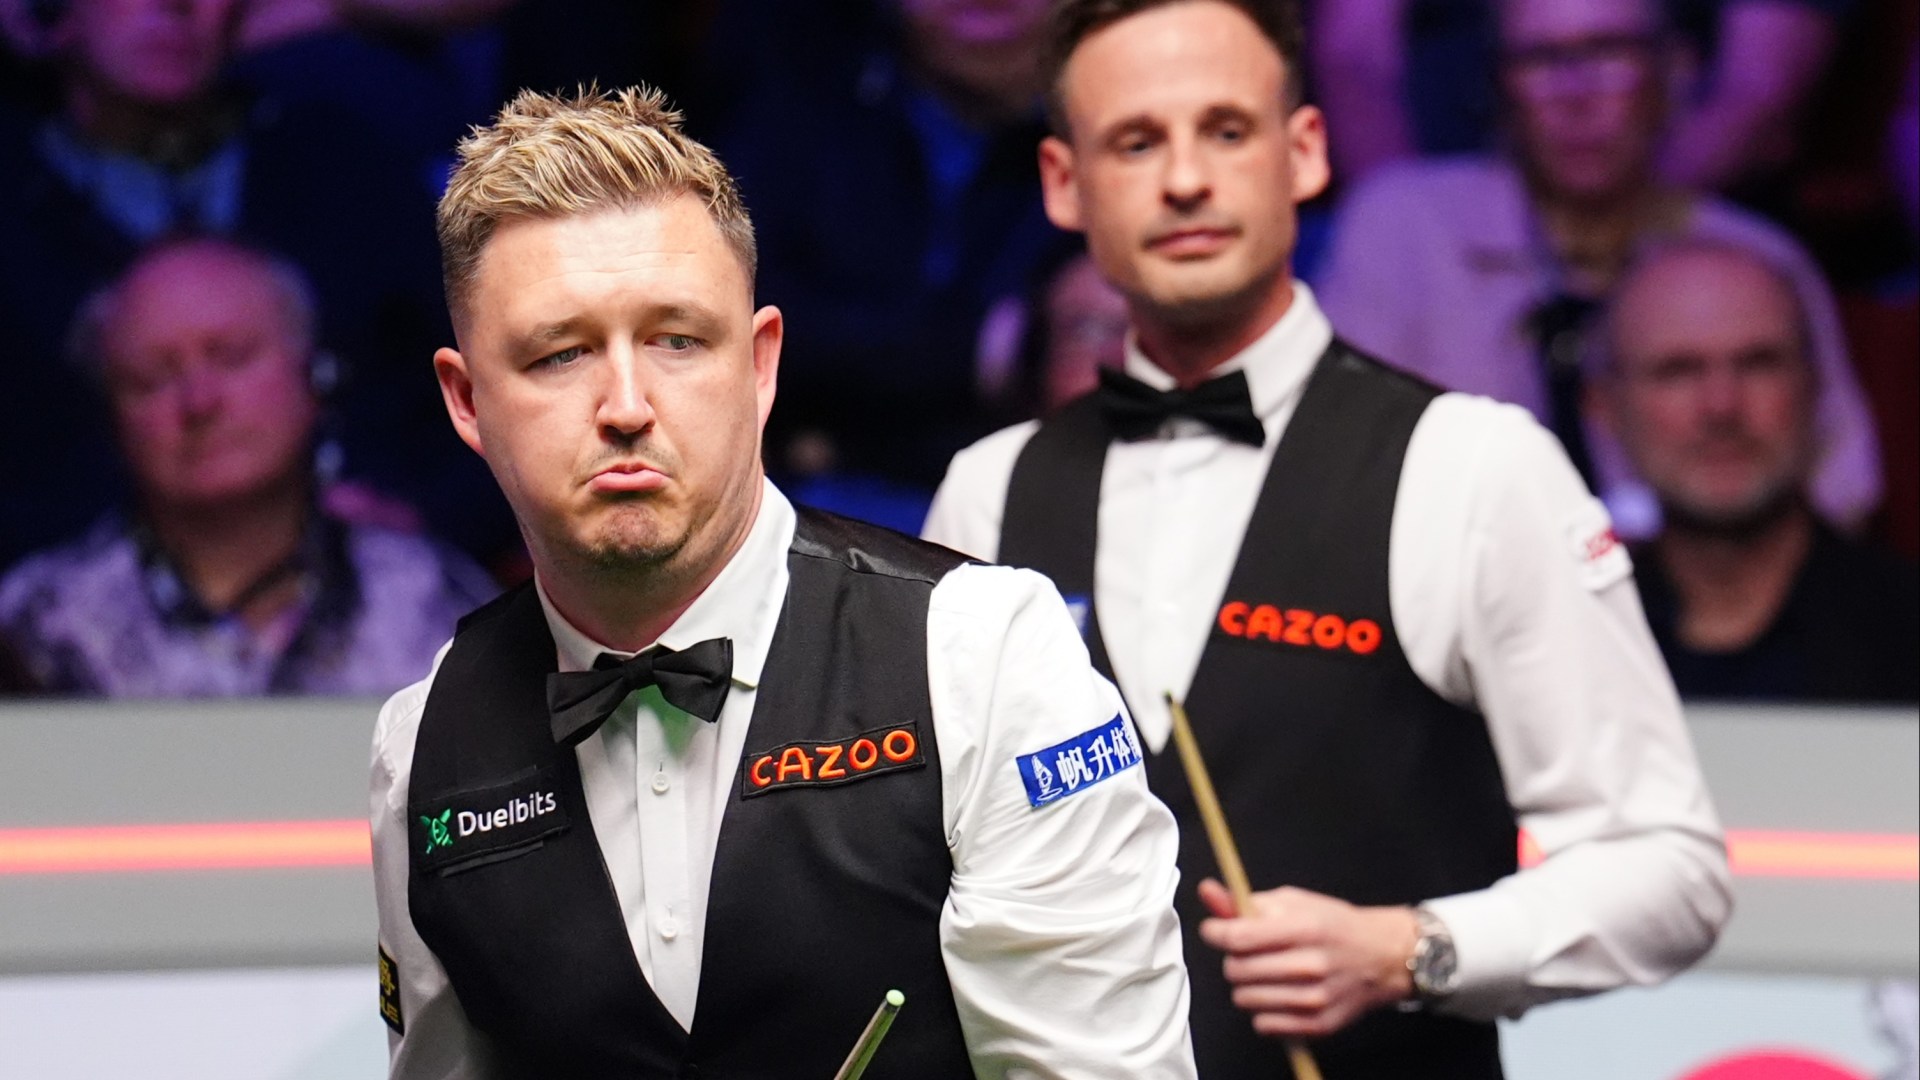 Ninety eight-year snooker tradition may be SCRAPPED amid controversial plans to move World Championships to Saudi Arabia [Video]